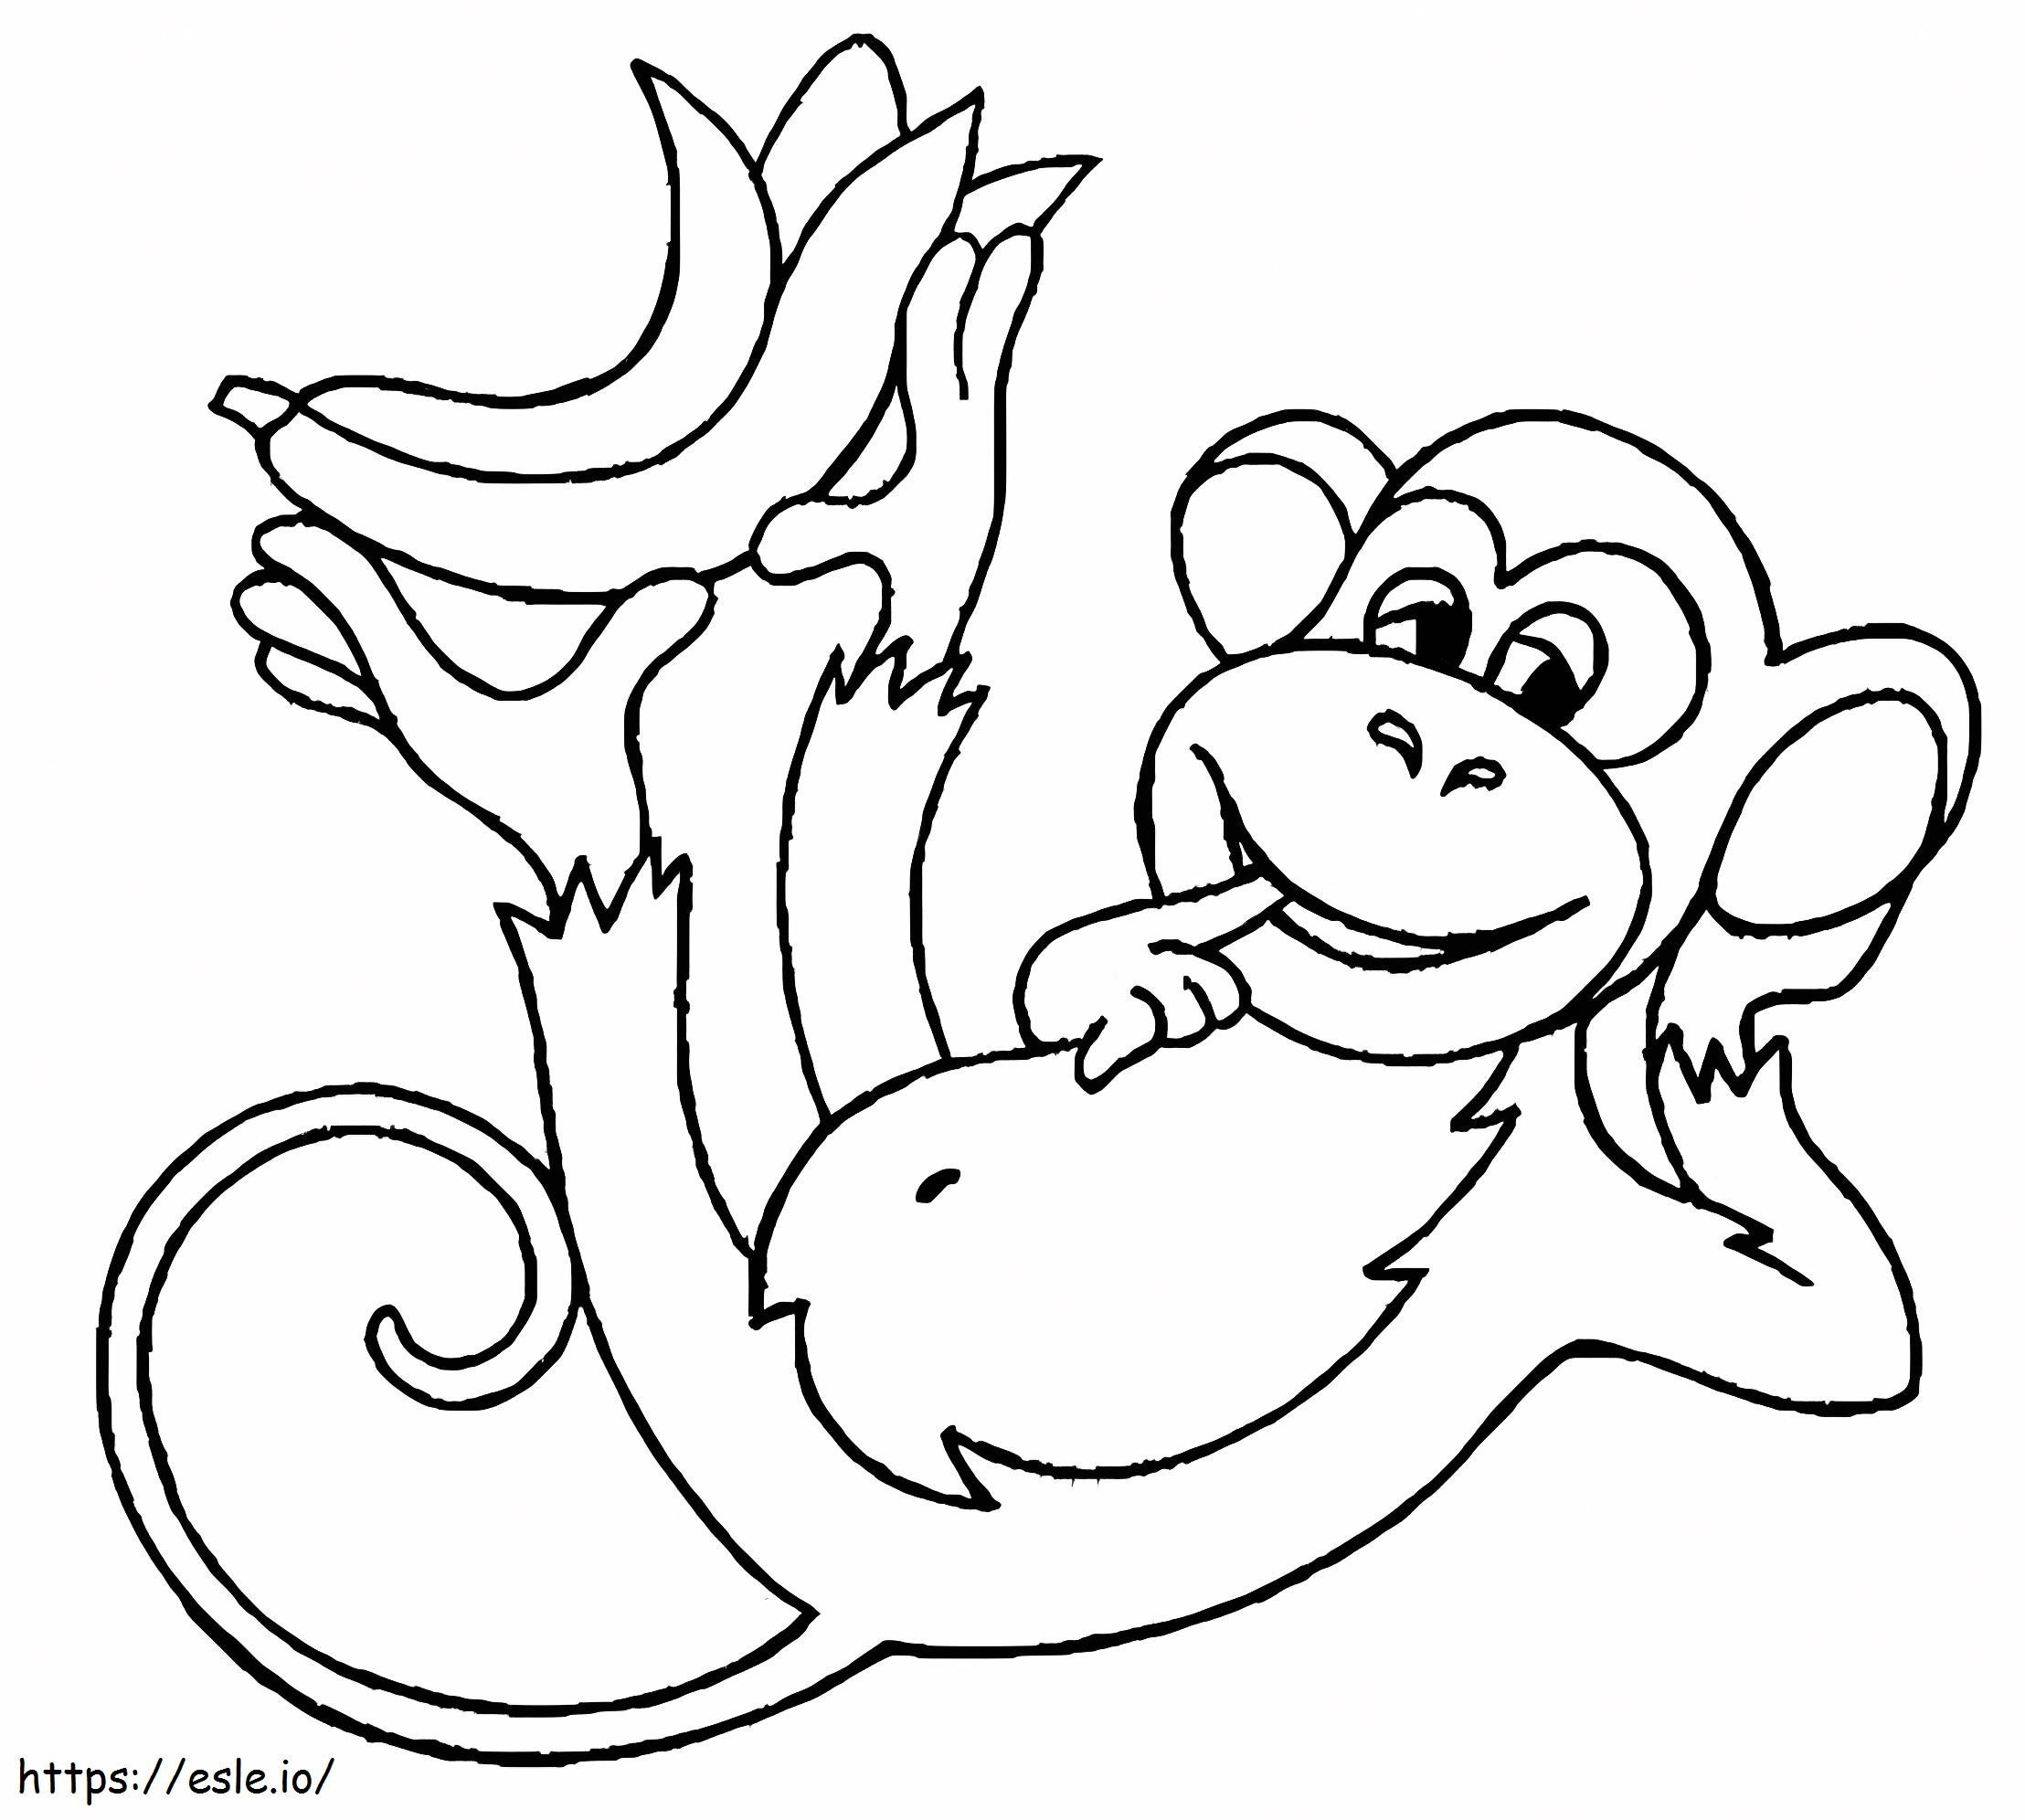 Funny Monkey With Banana coloring page